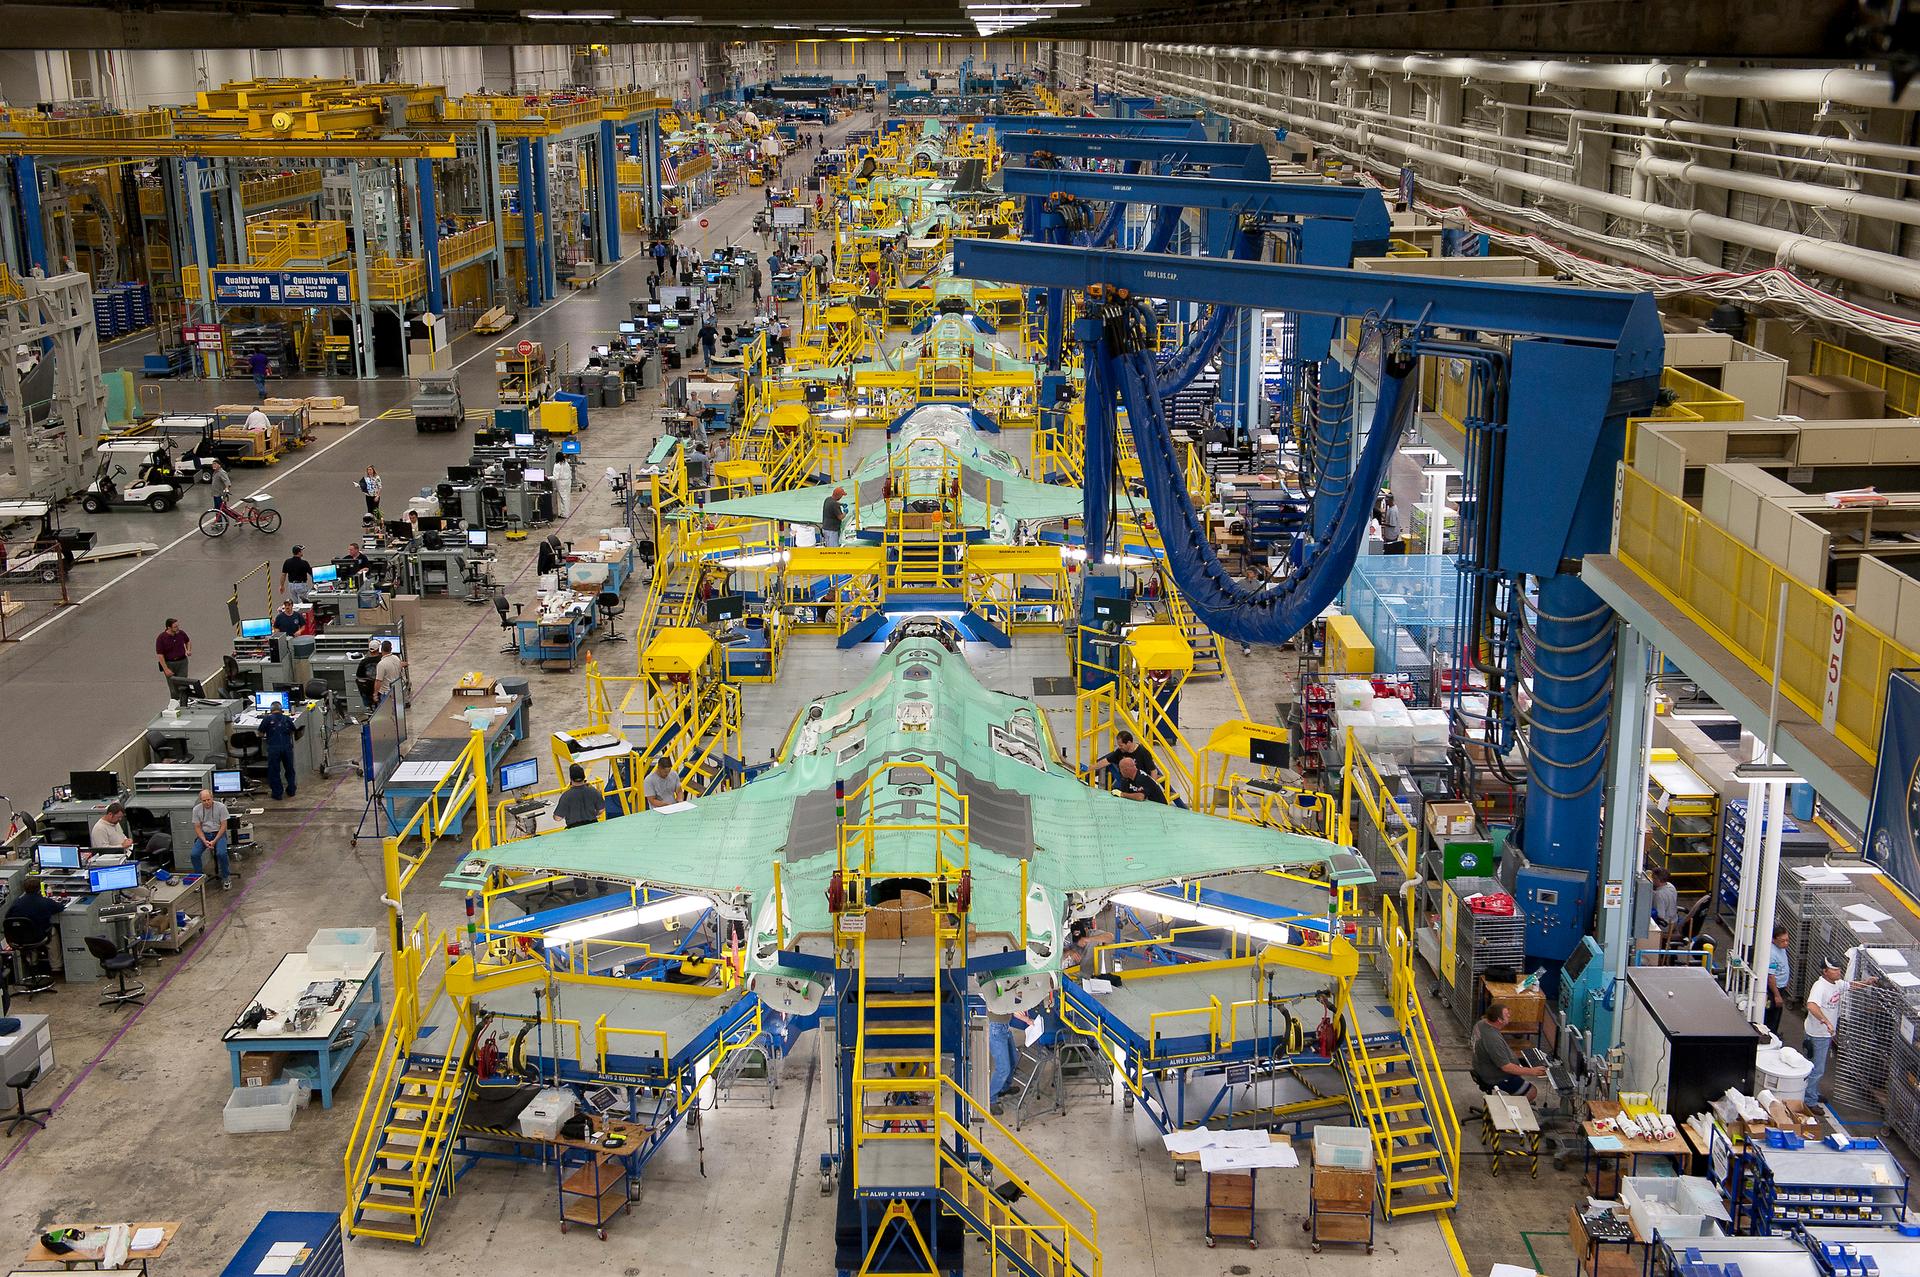 Workers can be seen on the moving line and forward fuselage assembly areas for the F-35 Joint Strike Fighter at Lockheed Martin Corp's factory located in Fort Worth, Tex